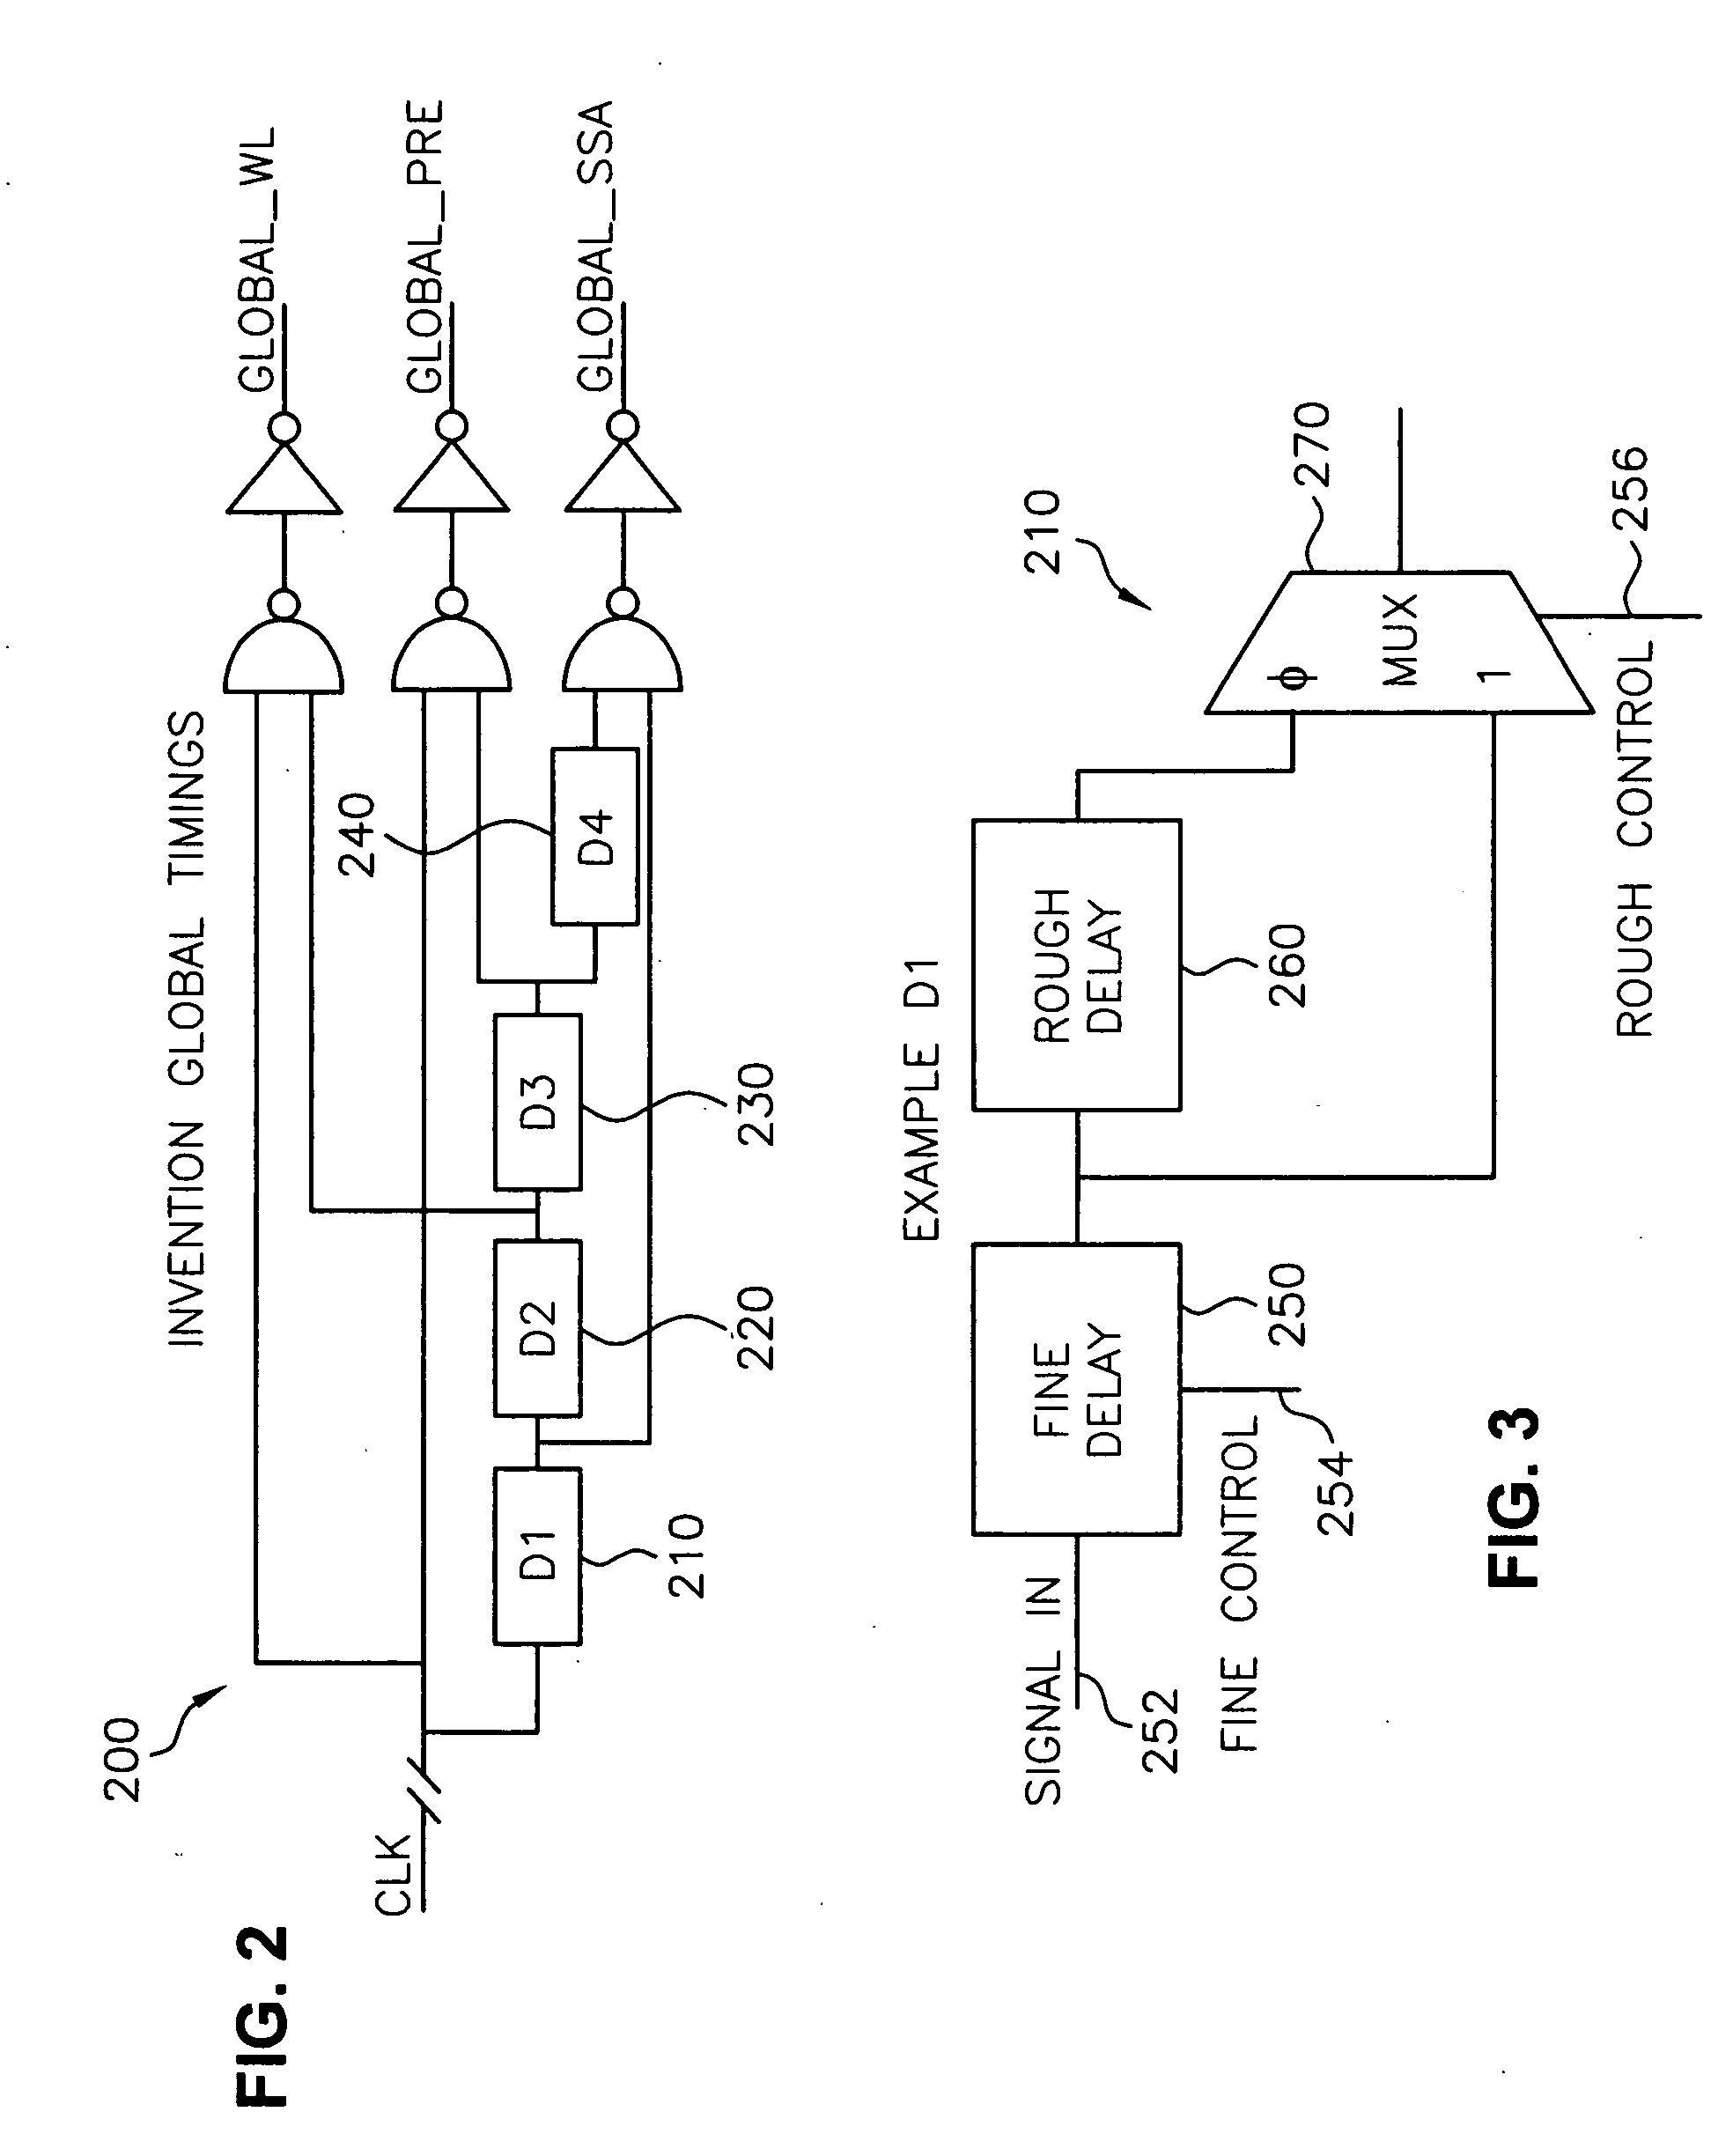 Method and apparatus for test and repair of marginally functional SRAM cells